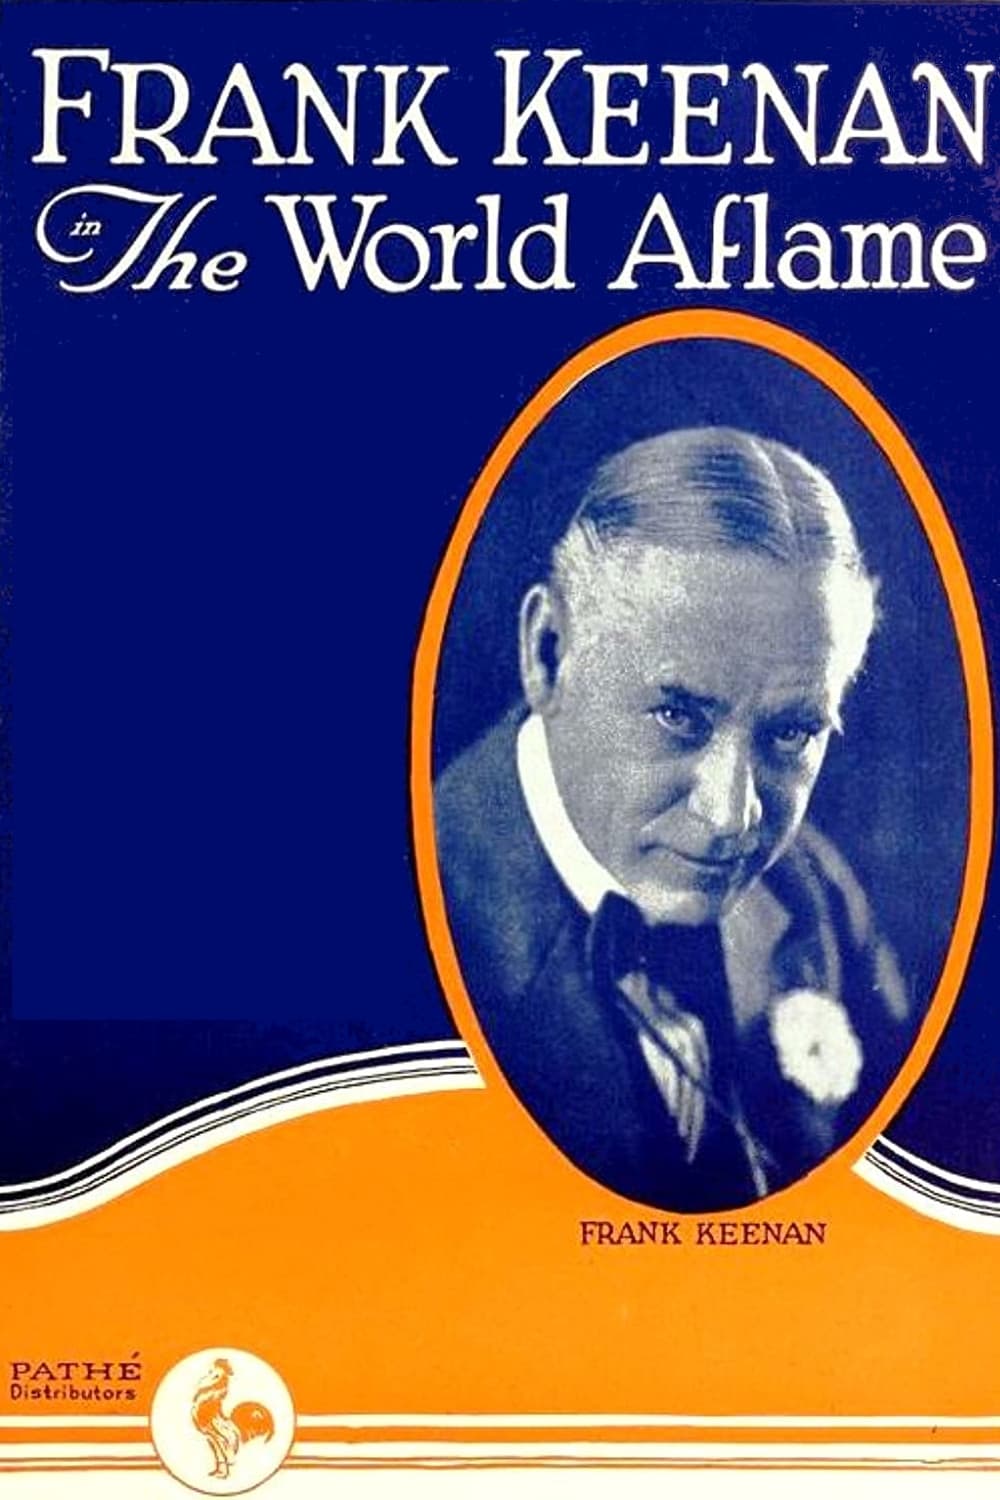 The World Aflame (1919)